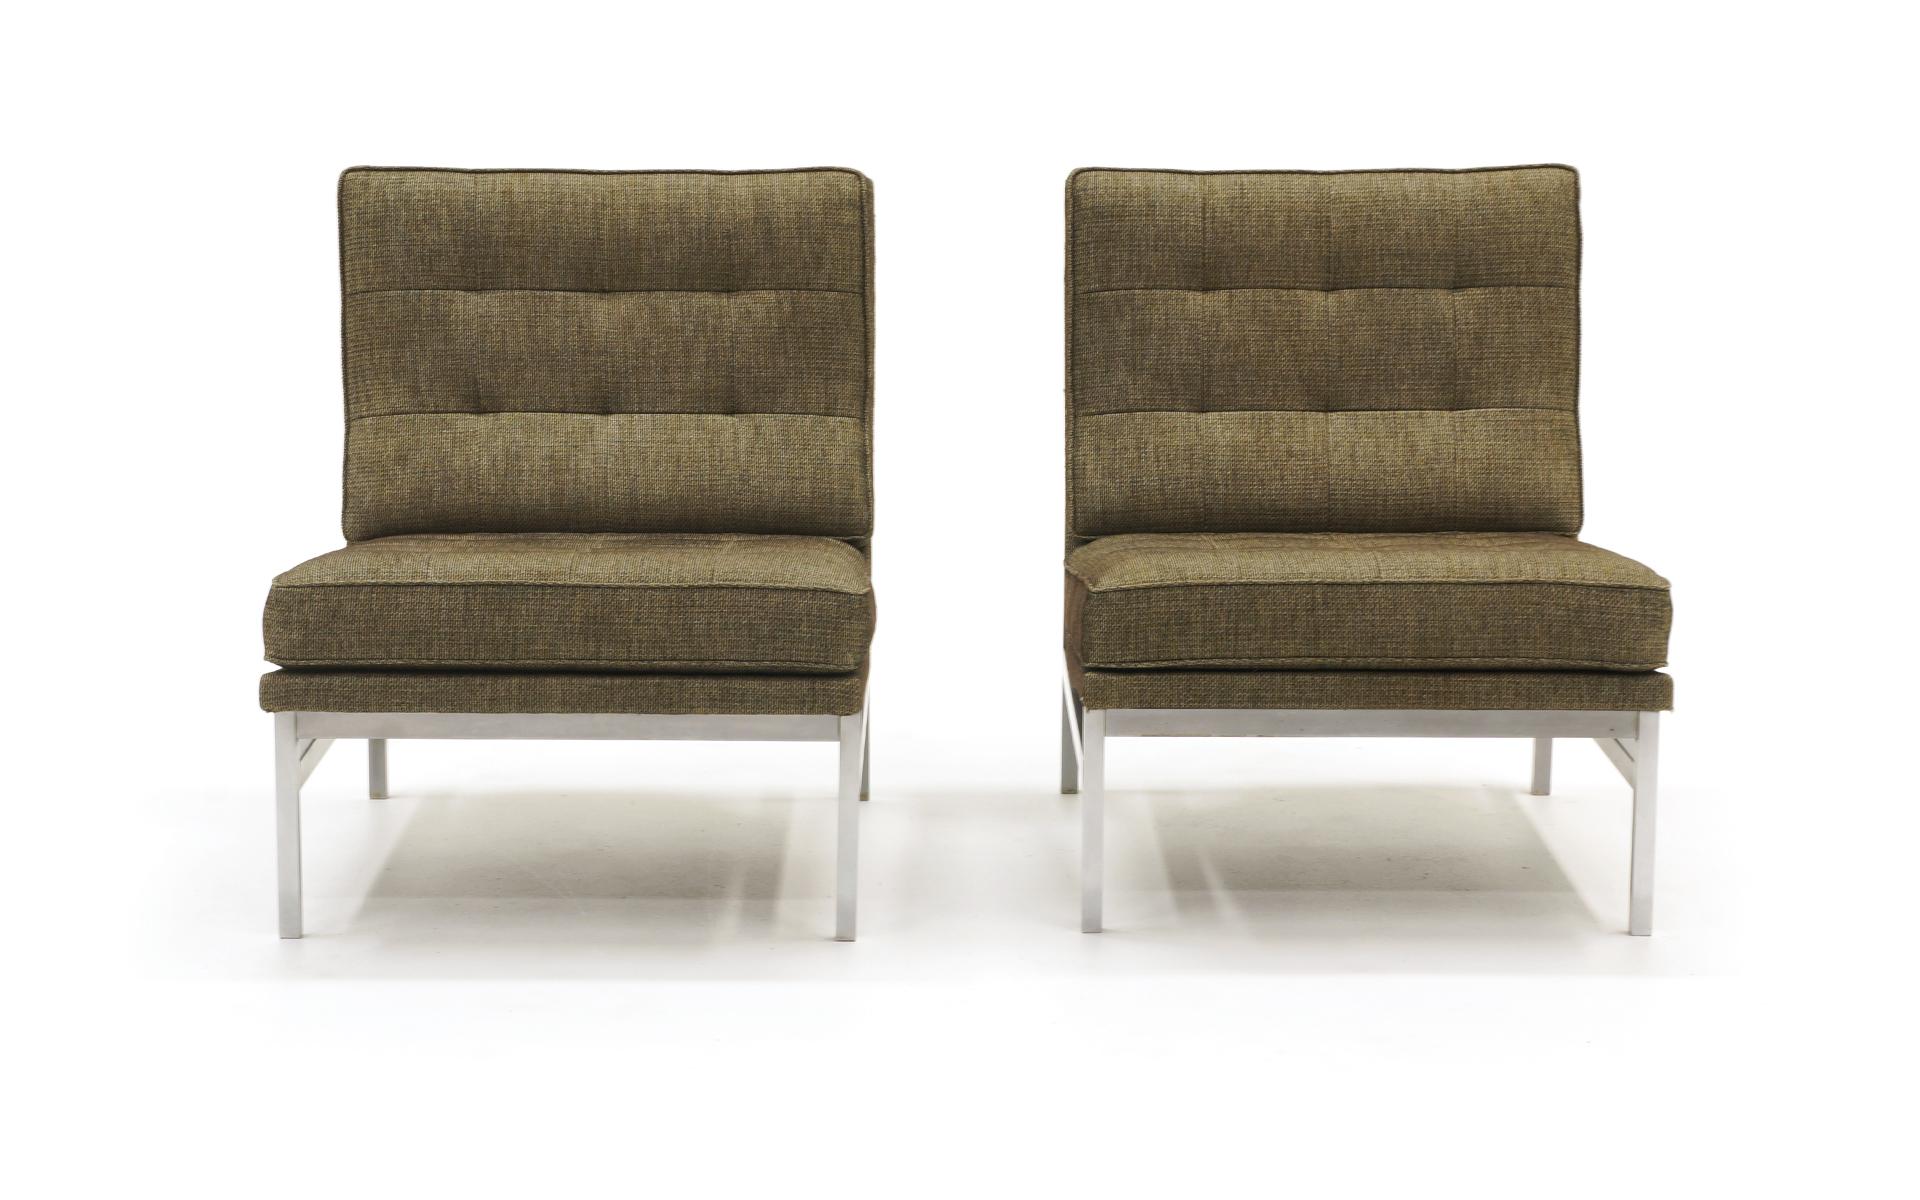 Early and rare pair of Florence Knoll chairs. Expertly reupholstered. These predate the parallel bar series with a simpler, cleaner, square tube brushed steel frame. Place them side by side to form a loveseat / settee.